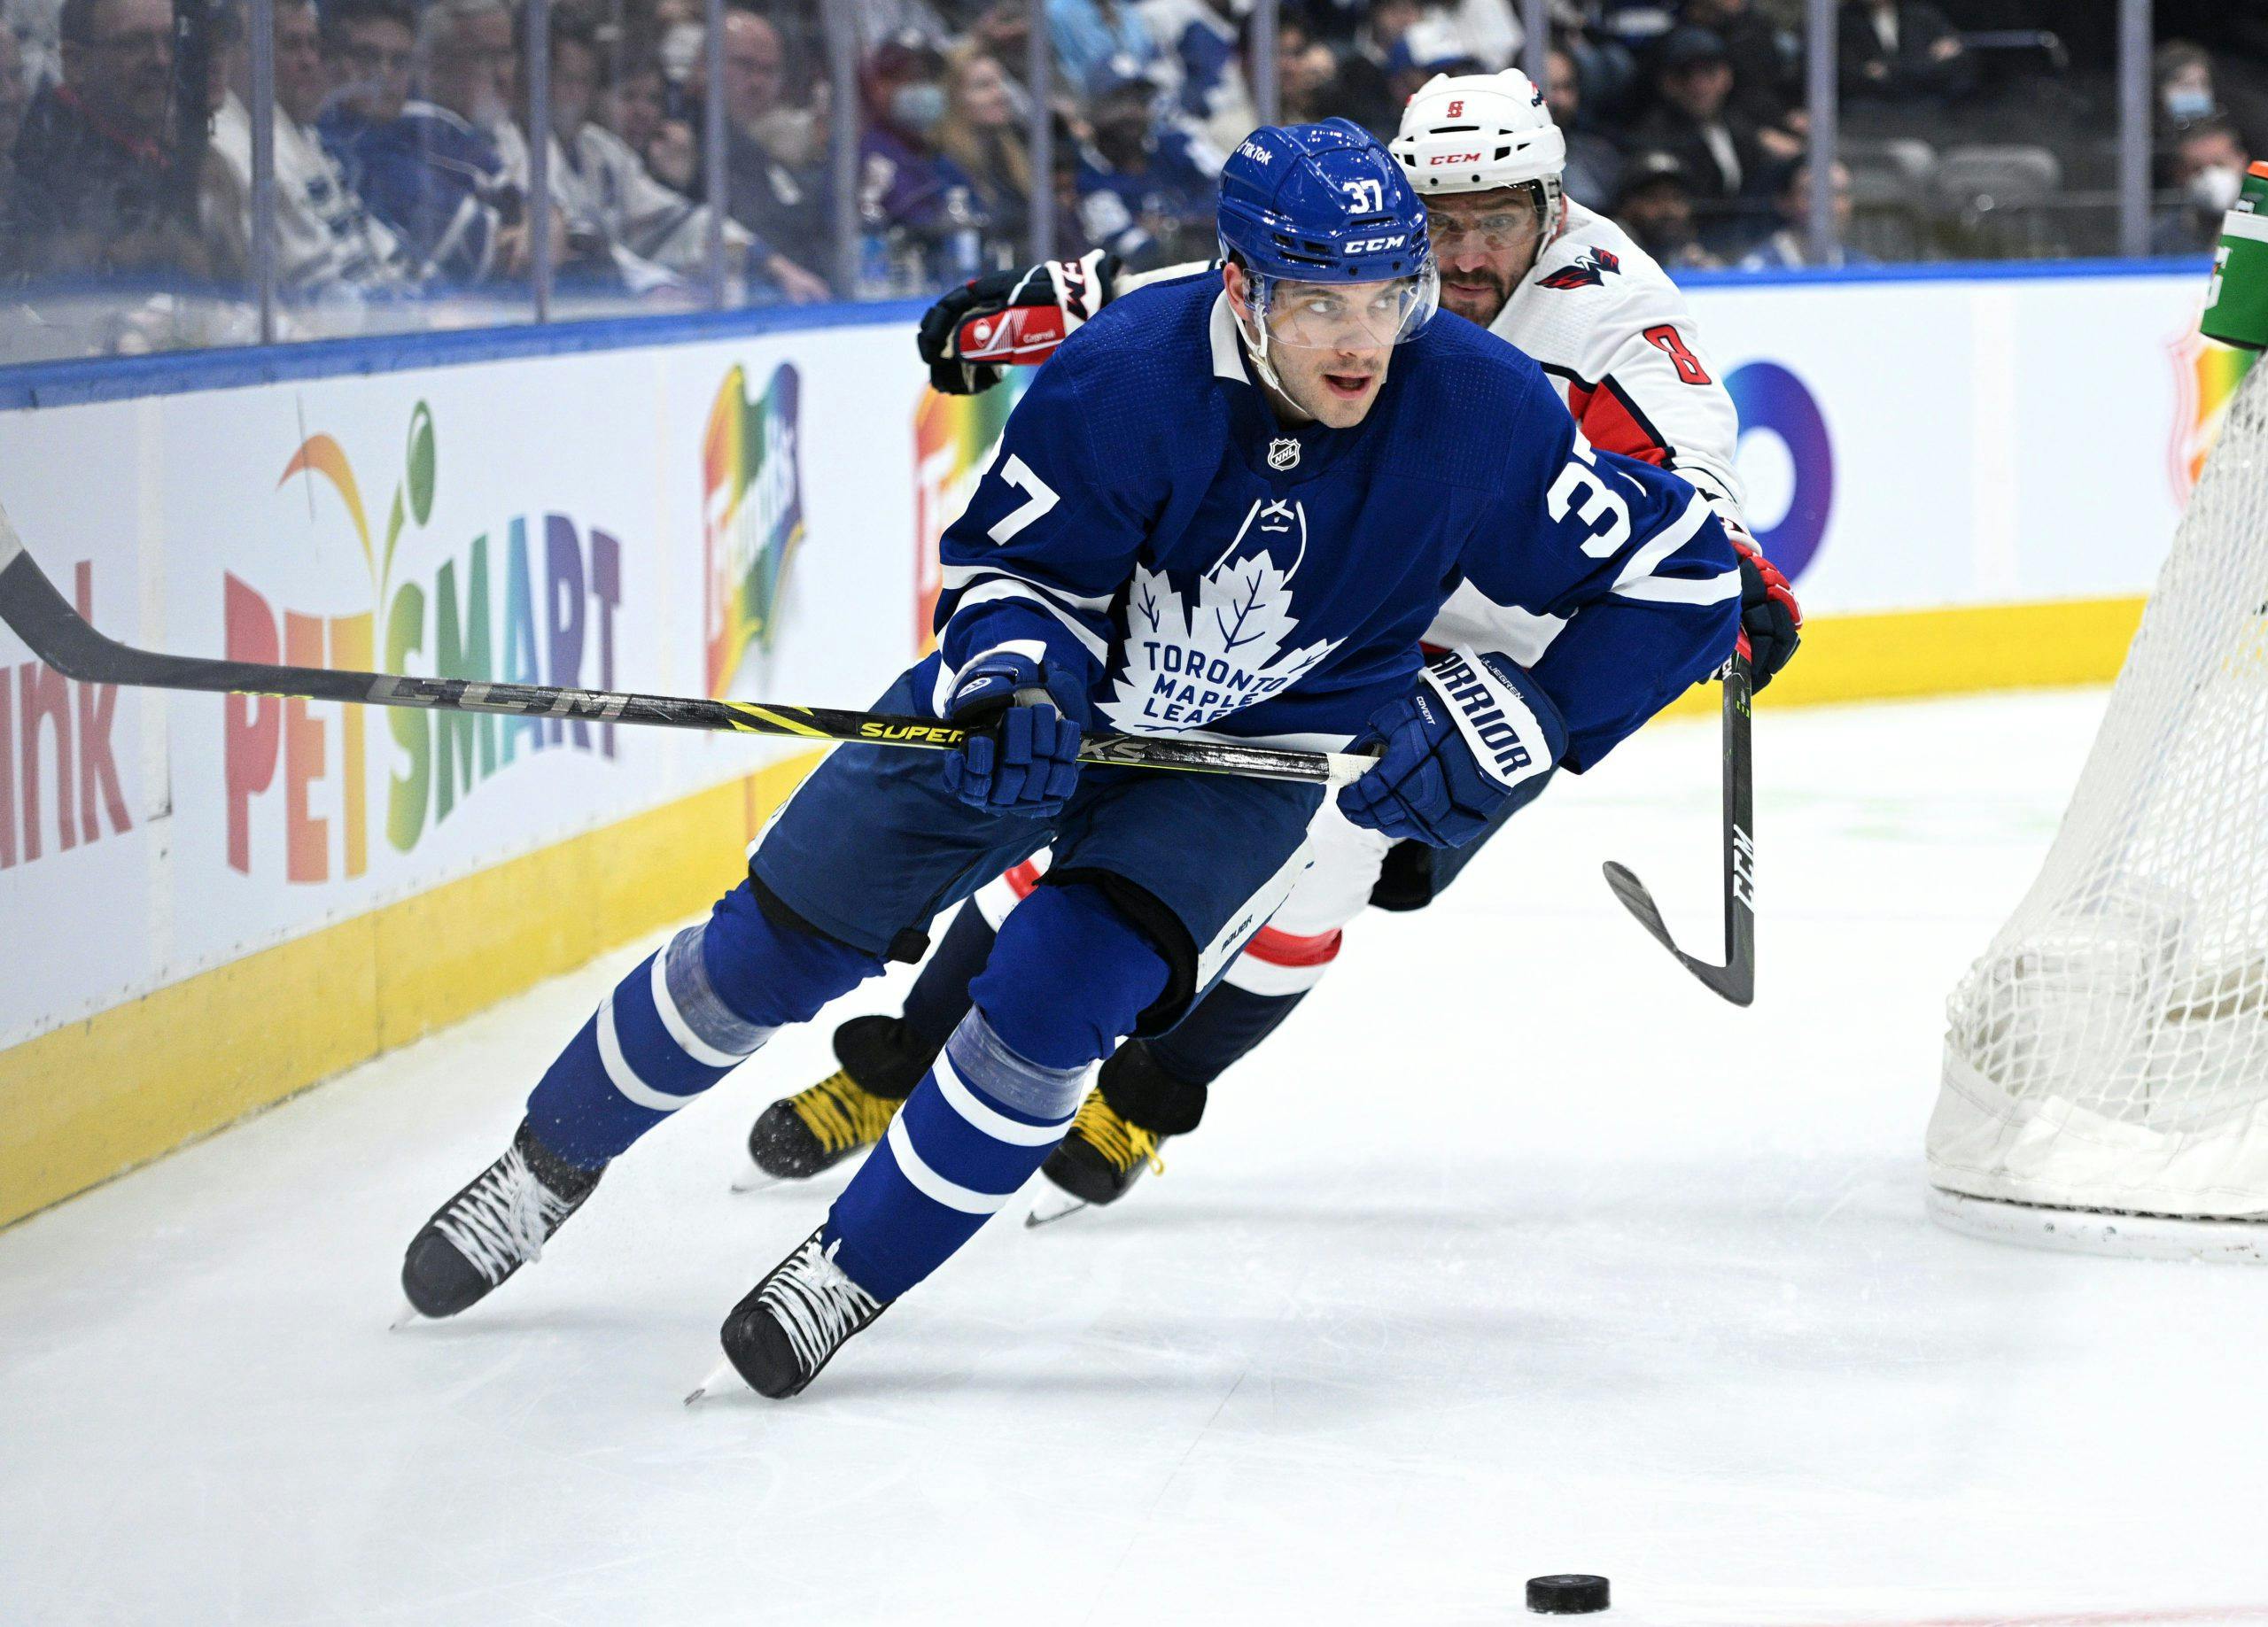 The Maple Leafs have re-signed defenseman Timothy Liljegren to a 2